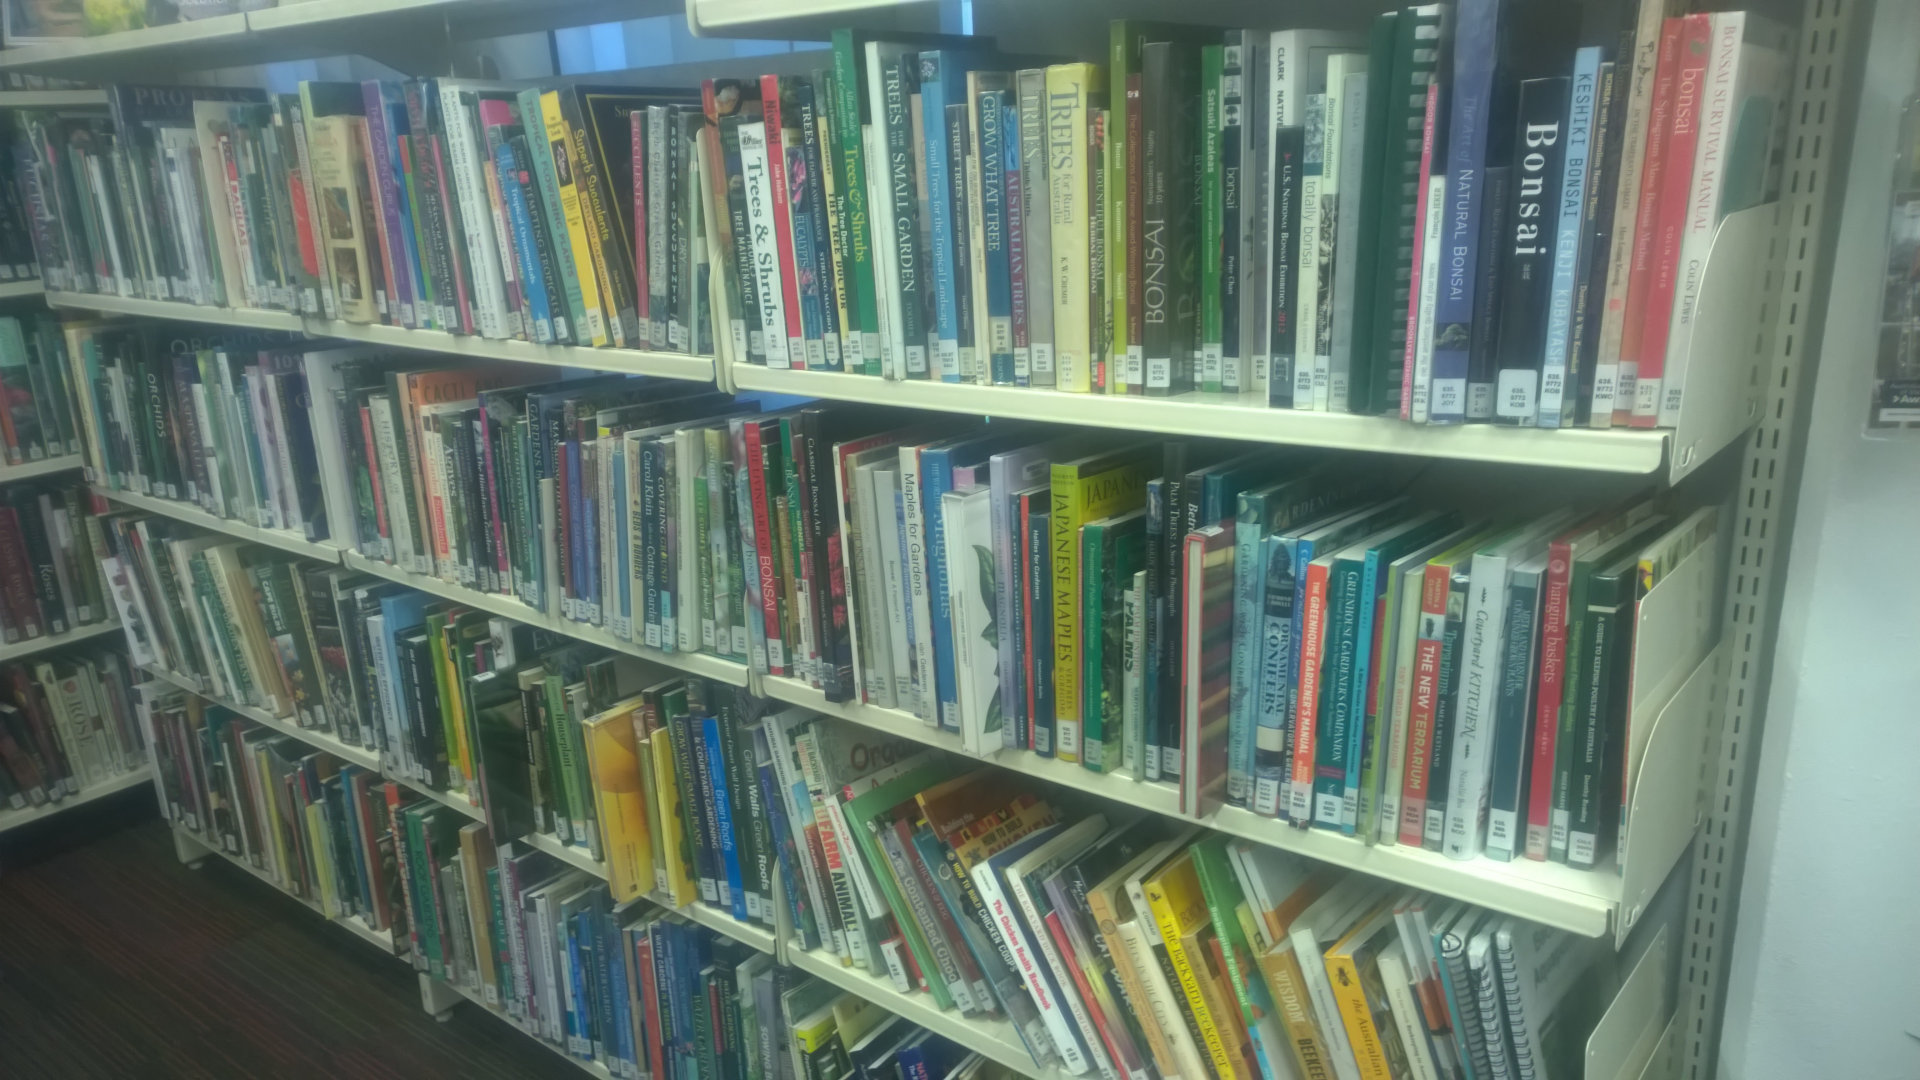 Book shelves in the Mt Coot-tha Library, located on the grounds of the Mt Coot-tha Botanic Gardens, specialising in botany, gardening, landscape design, botanic illustration, conservation, herbal medicine, astronomy